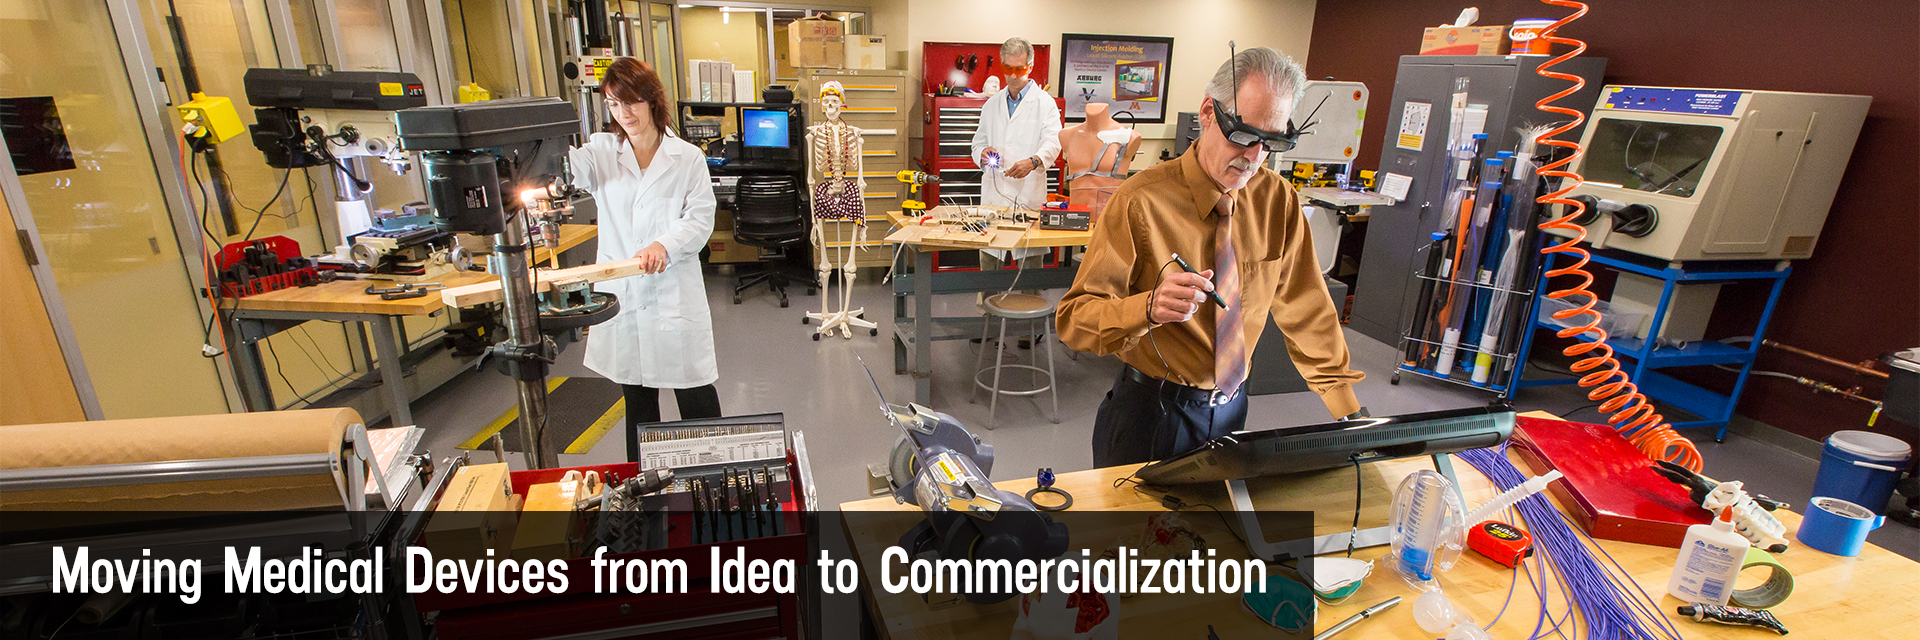 Moving Medical Devices from Idea to Commercialization